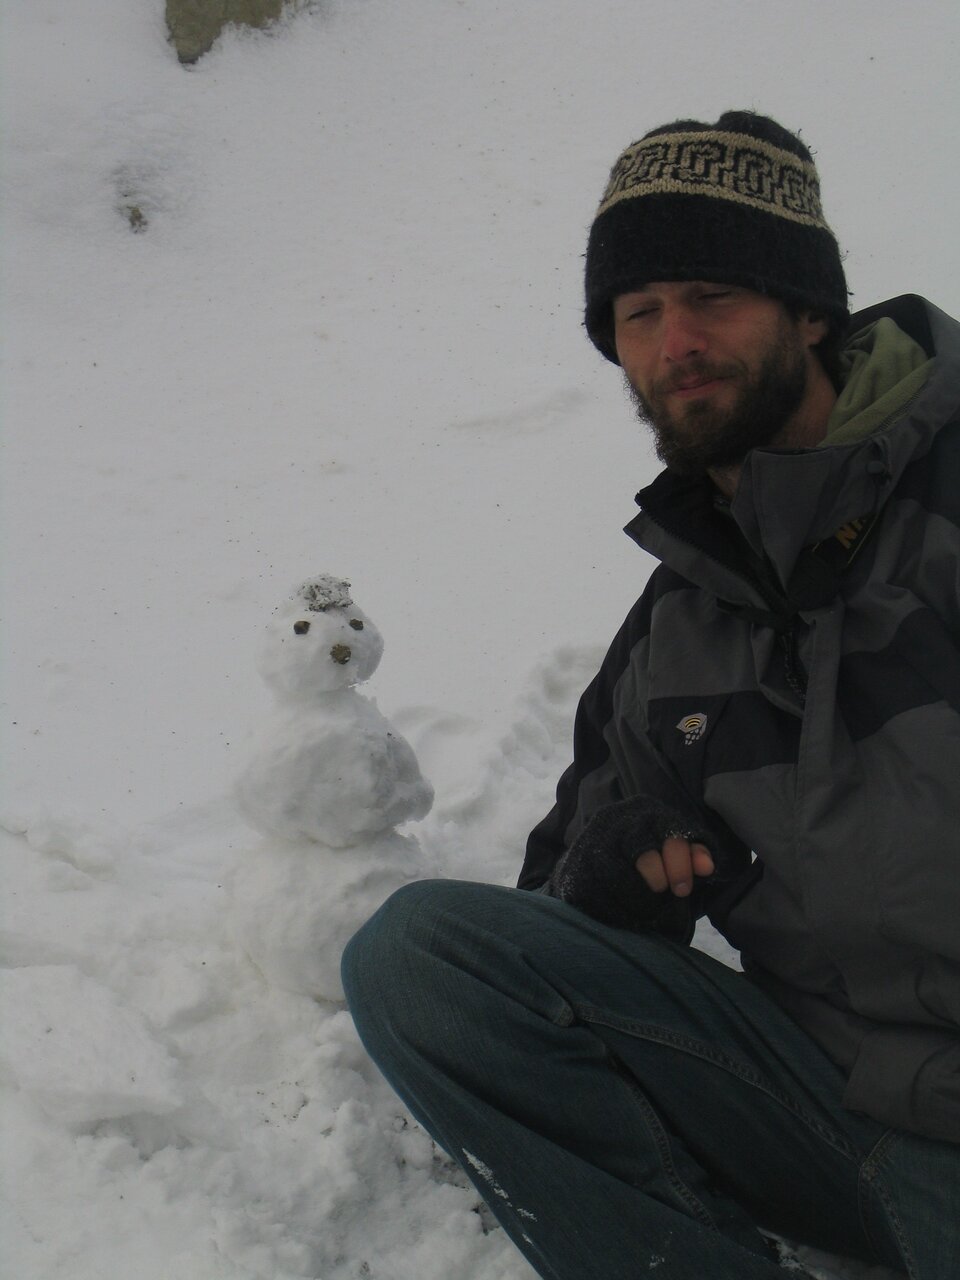 Will together with his snowman